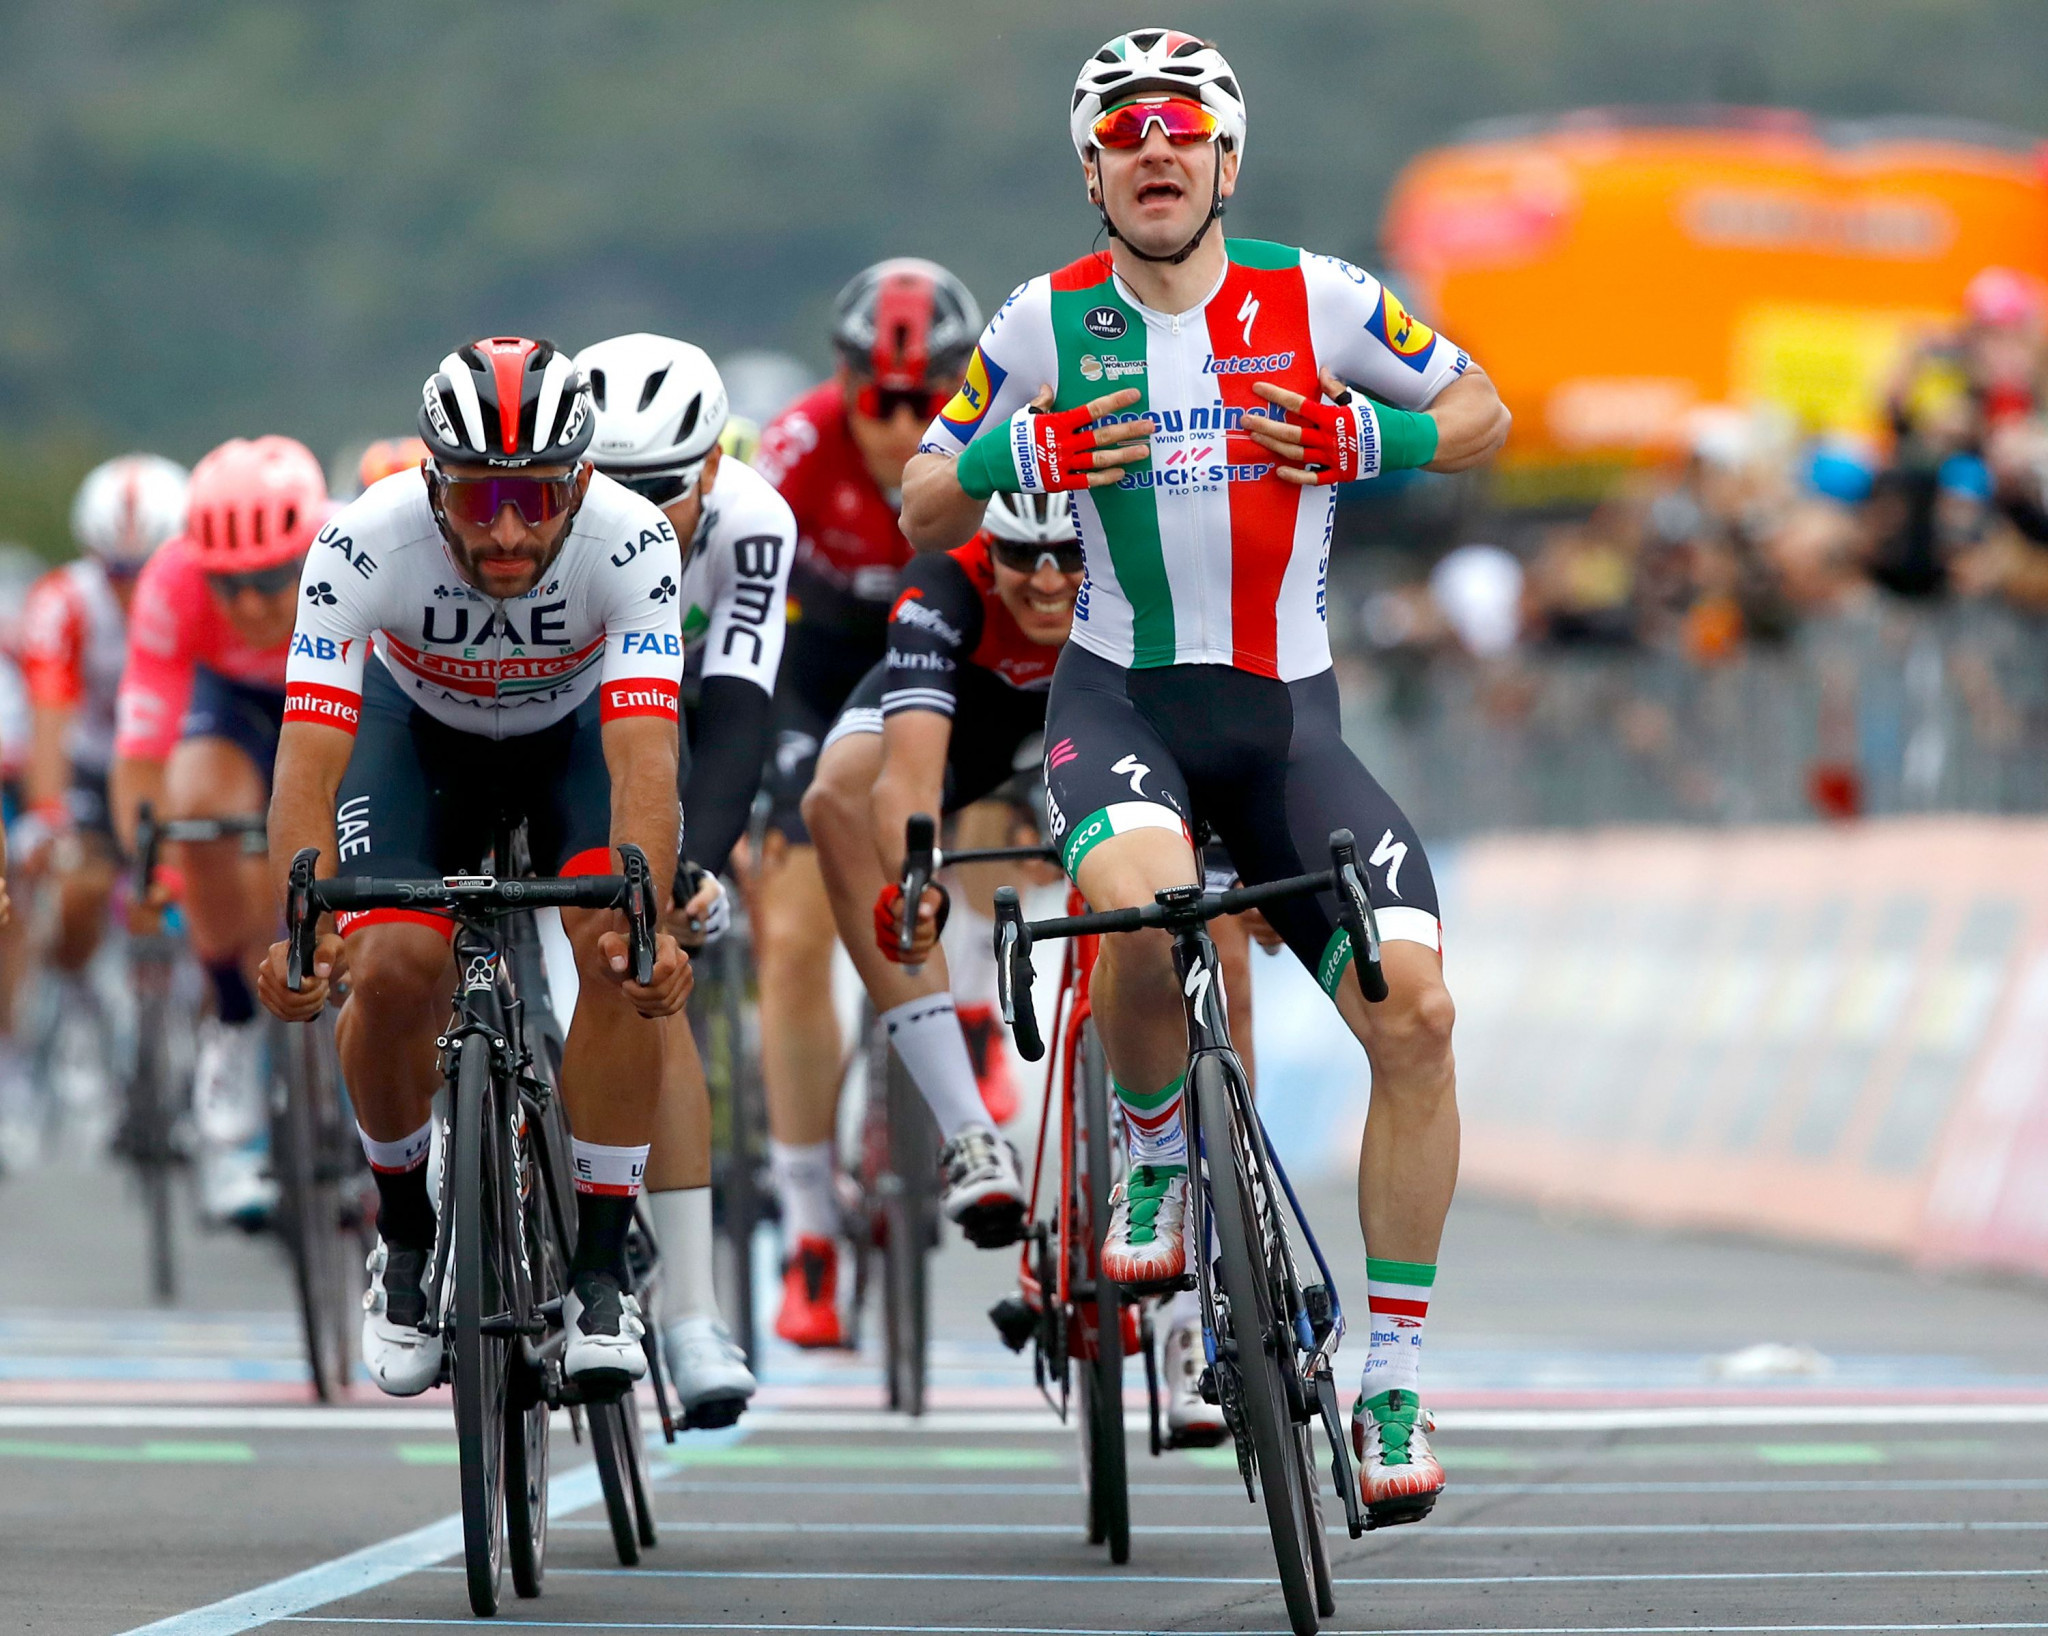 Home favourite Elia Viviani crossed the line first but was disqualified for dangerous riding ©Getty Images